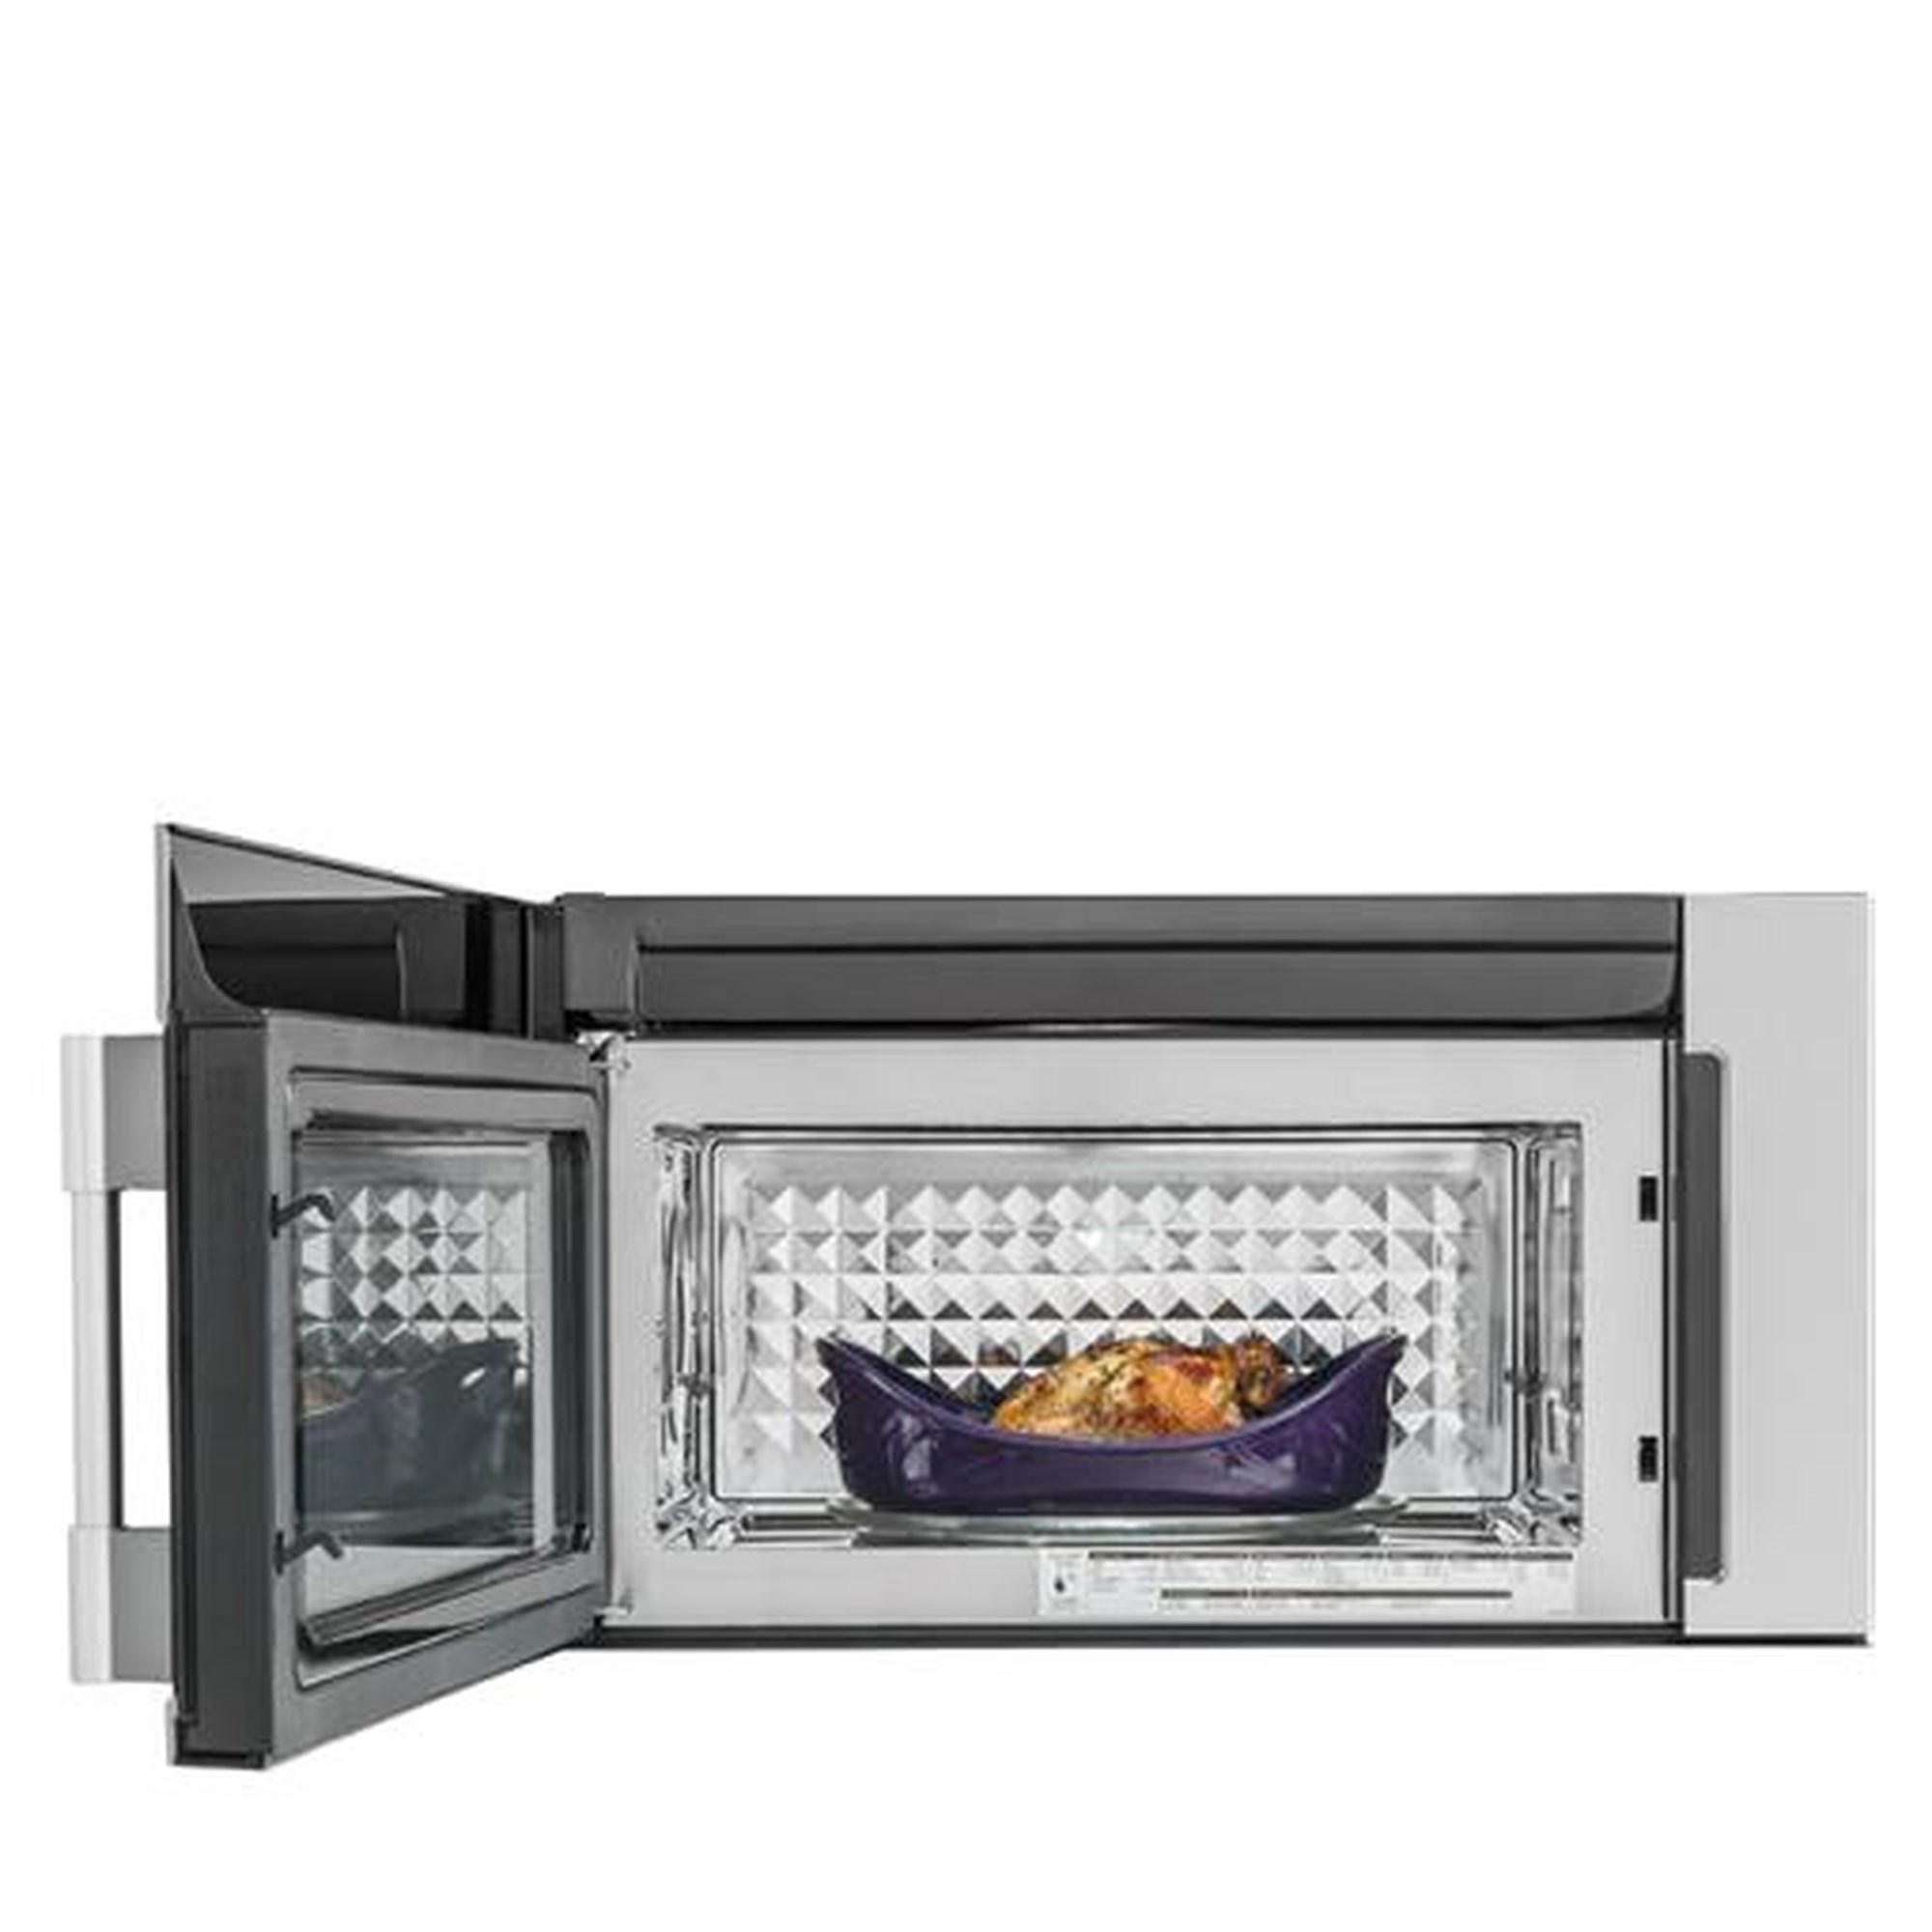 https://imageresizer4.furnituredealer.net/img/remote/images.furnituredealer.net/img/products%2Ffrigidaire%2Fcolor%2Fprofessional%20collection%20-%20microwaves_fpbm3077rf-b.jpg?width=2000&height=2000&scale=both